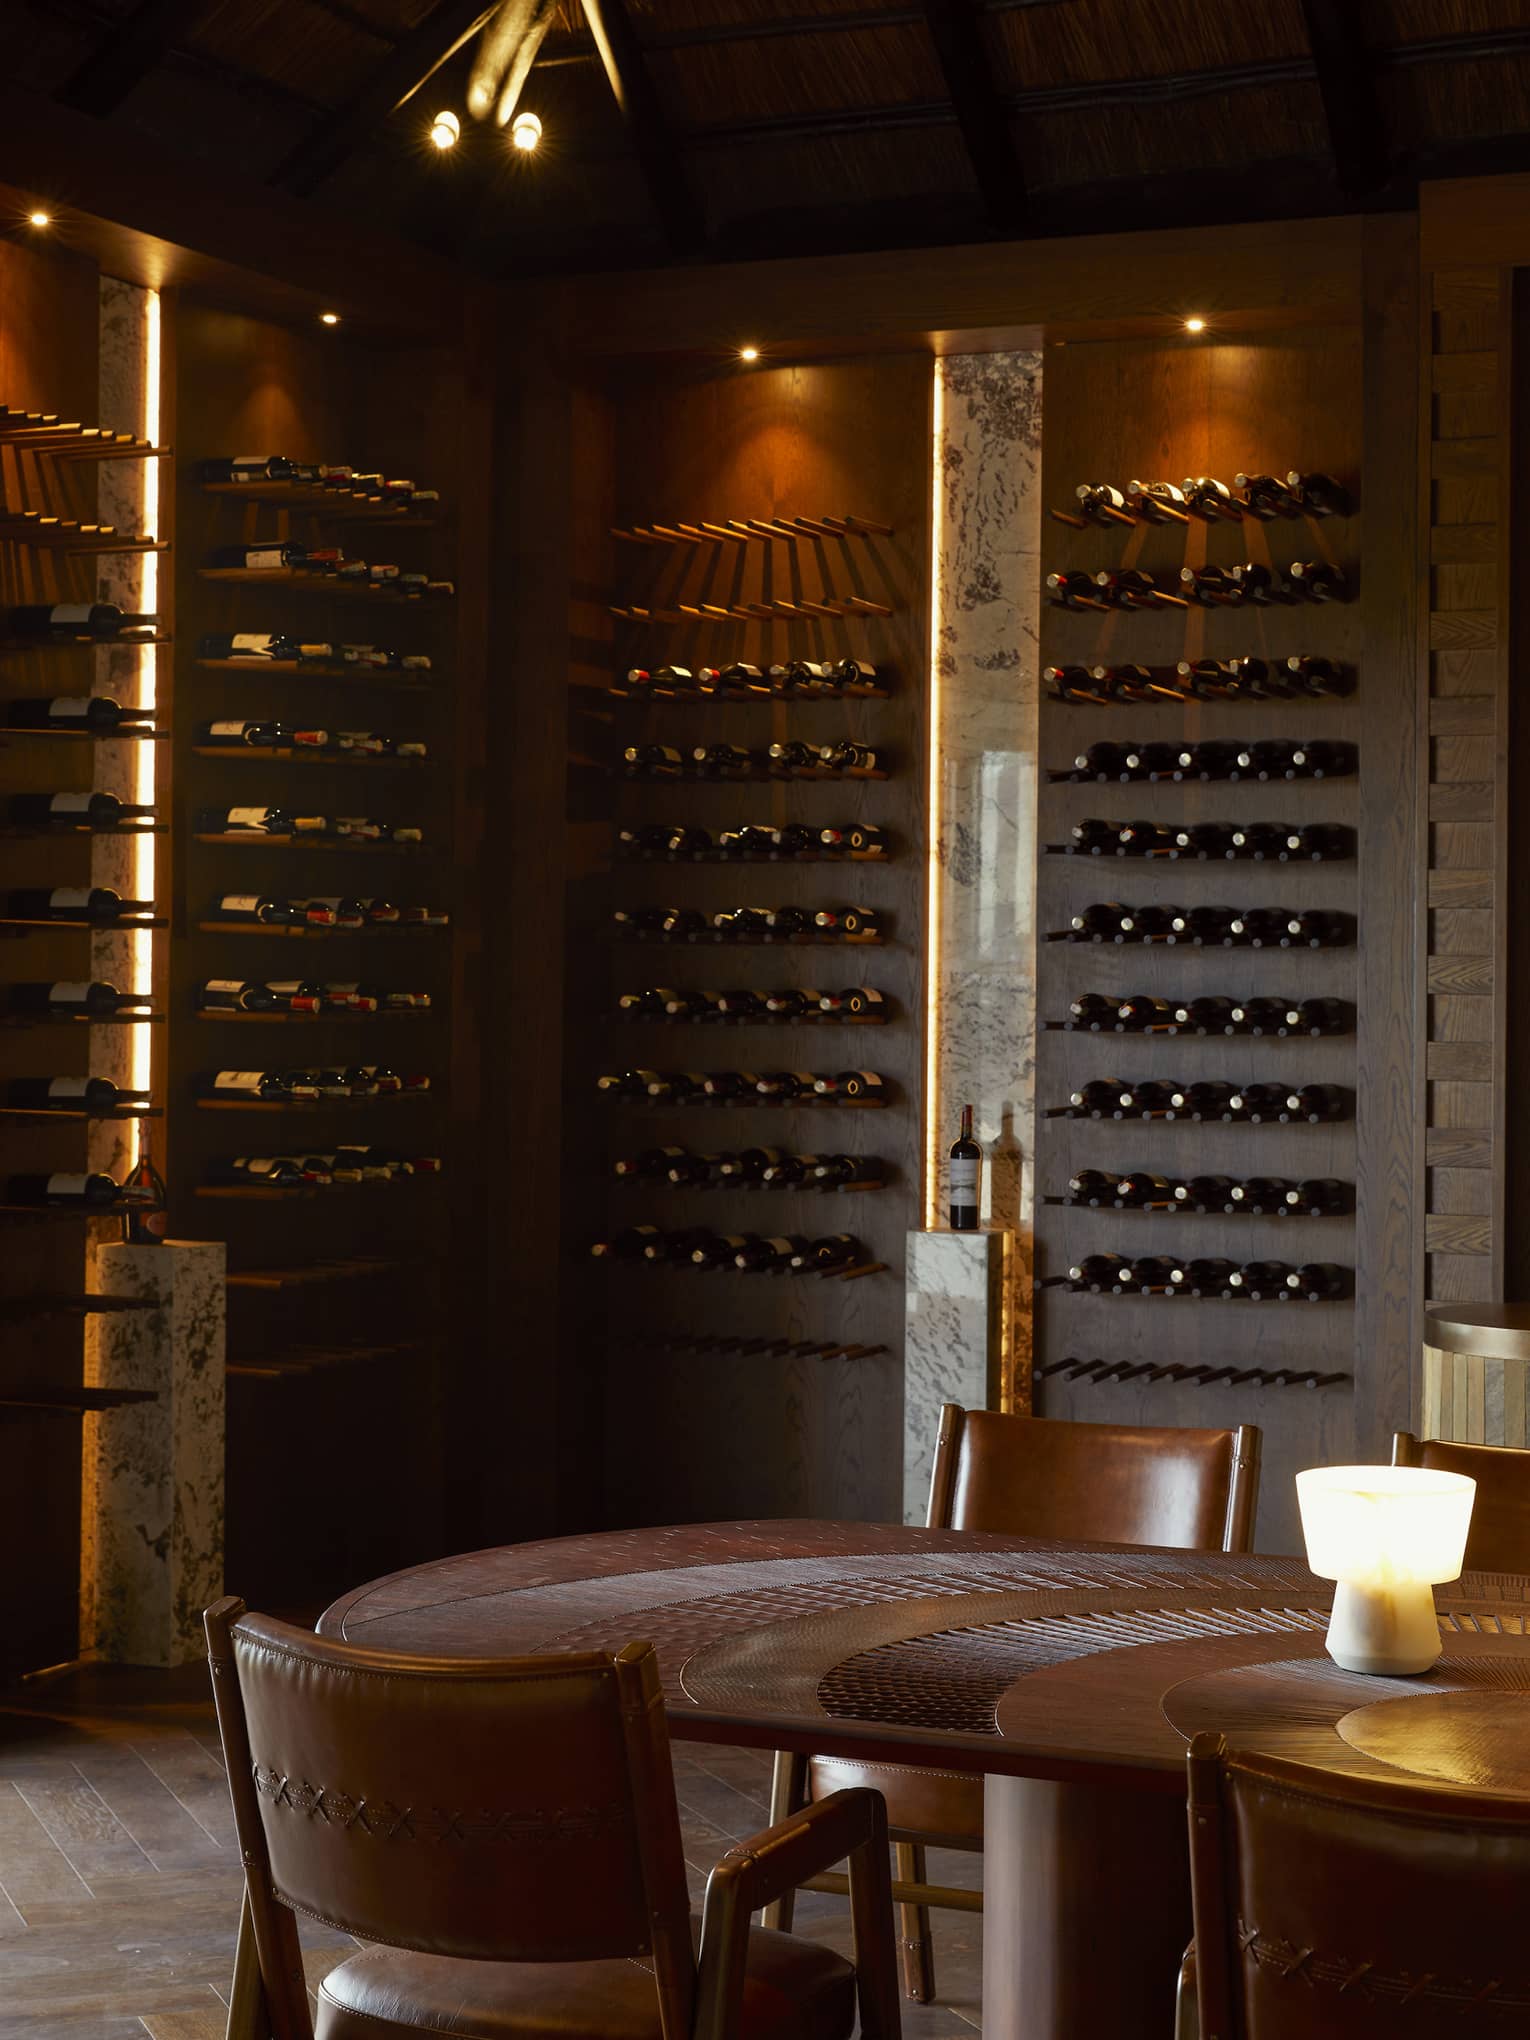 Dimly lit wine cellar with bottles lining dark wooden walls and round table in centre